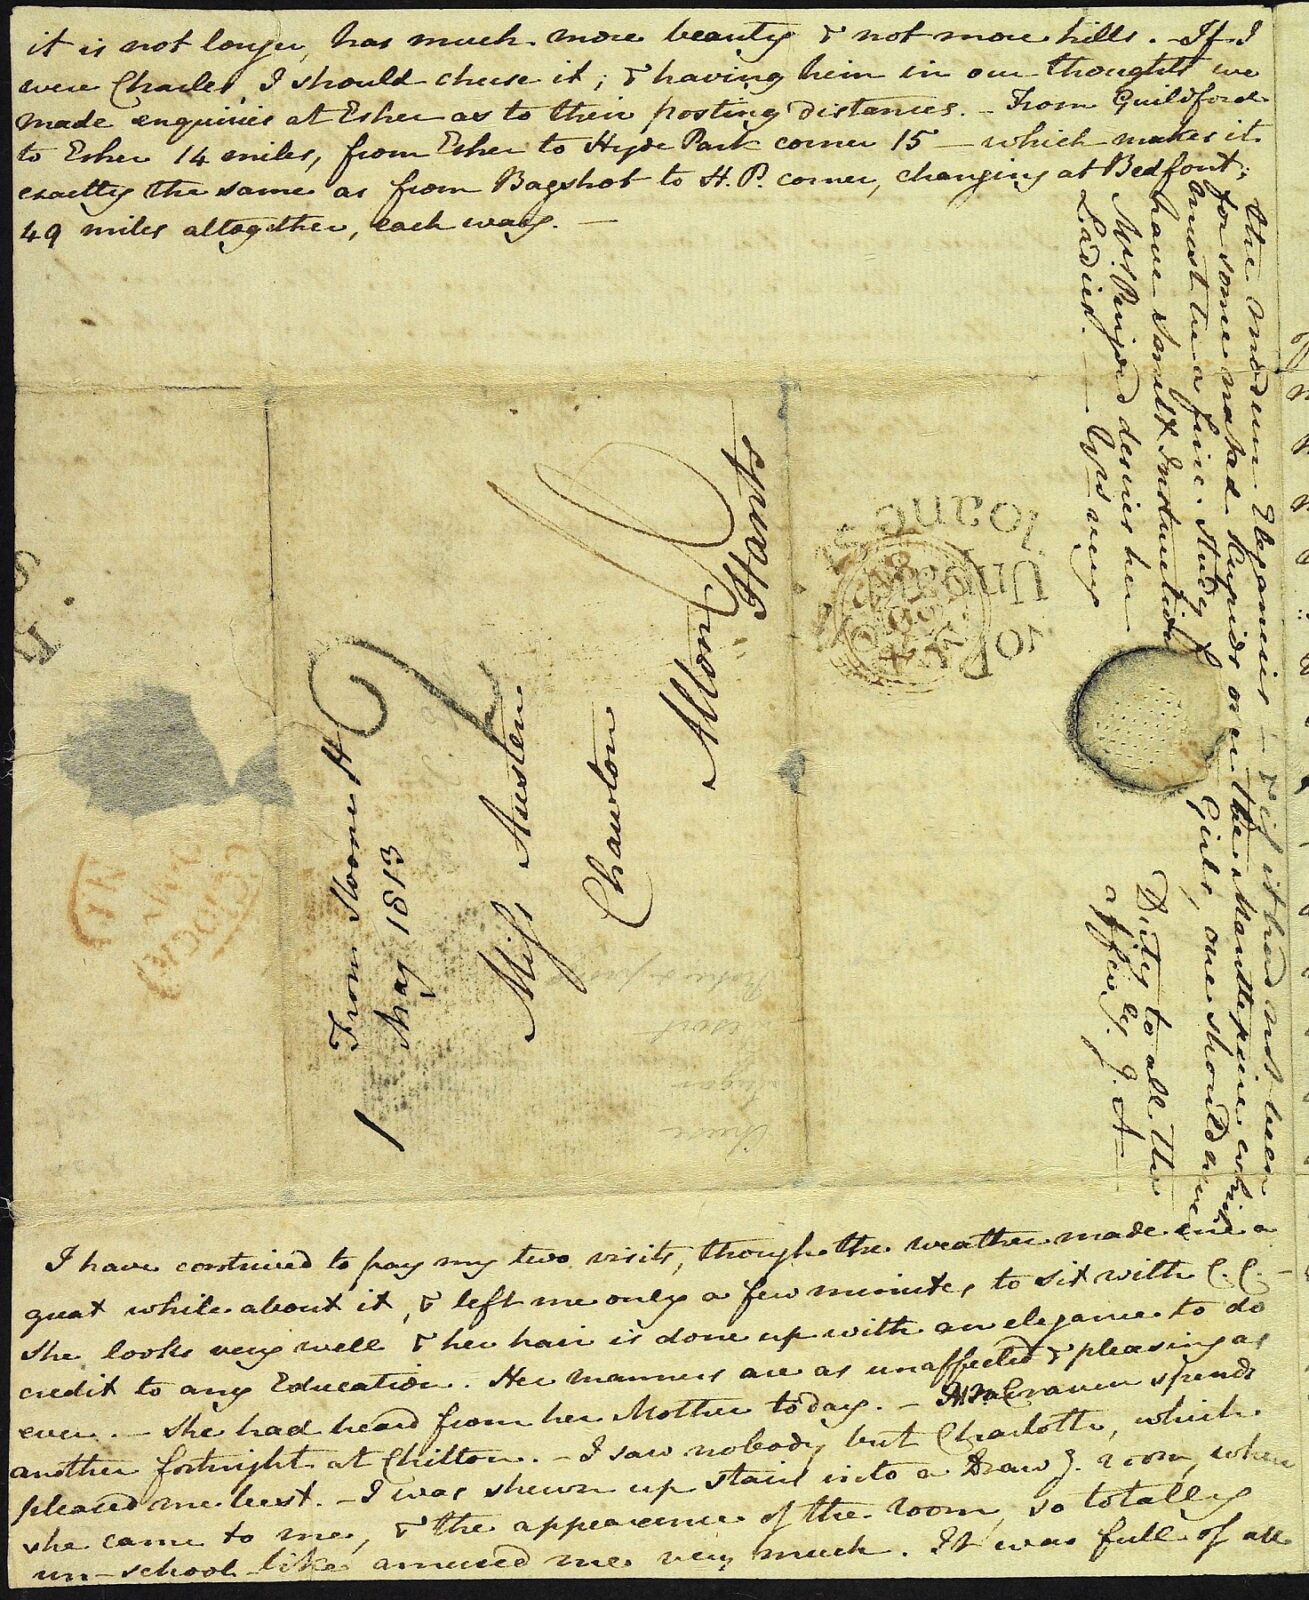 Letter from Jane Austen to Cassandra Austen, 20 May 1813, page 4 showing address